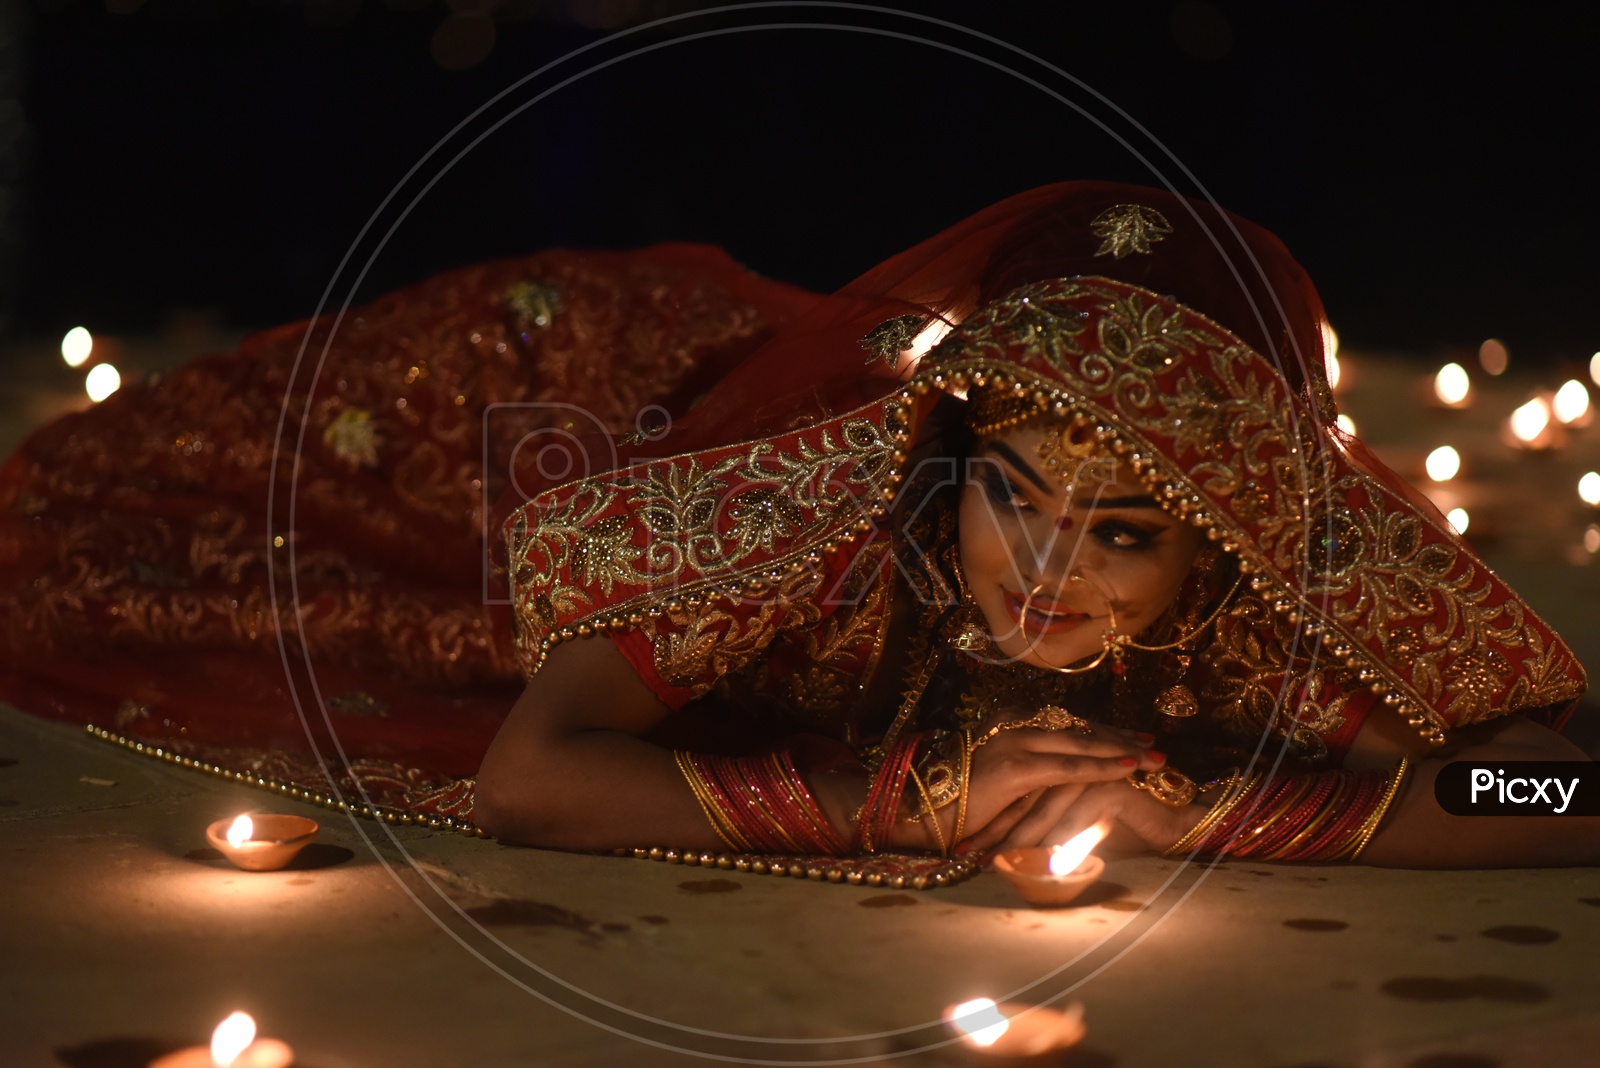 A Traditional Indian Woman  In Elegant Look With Diwali Dias  and Posing